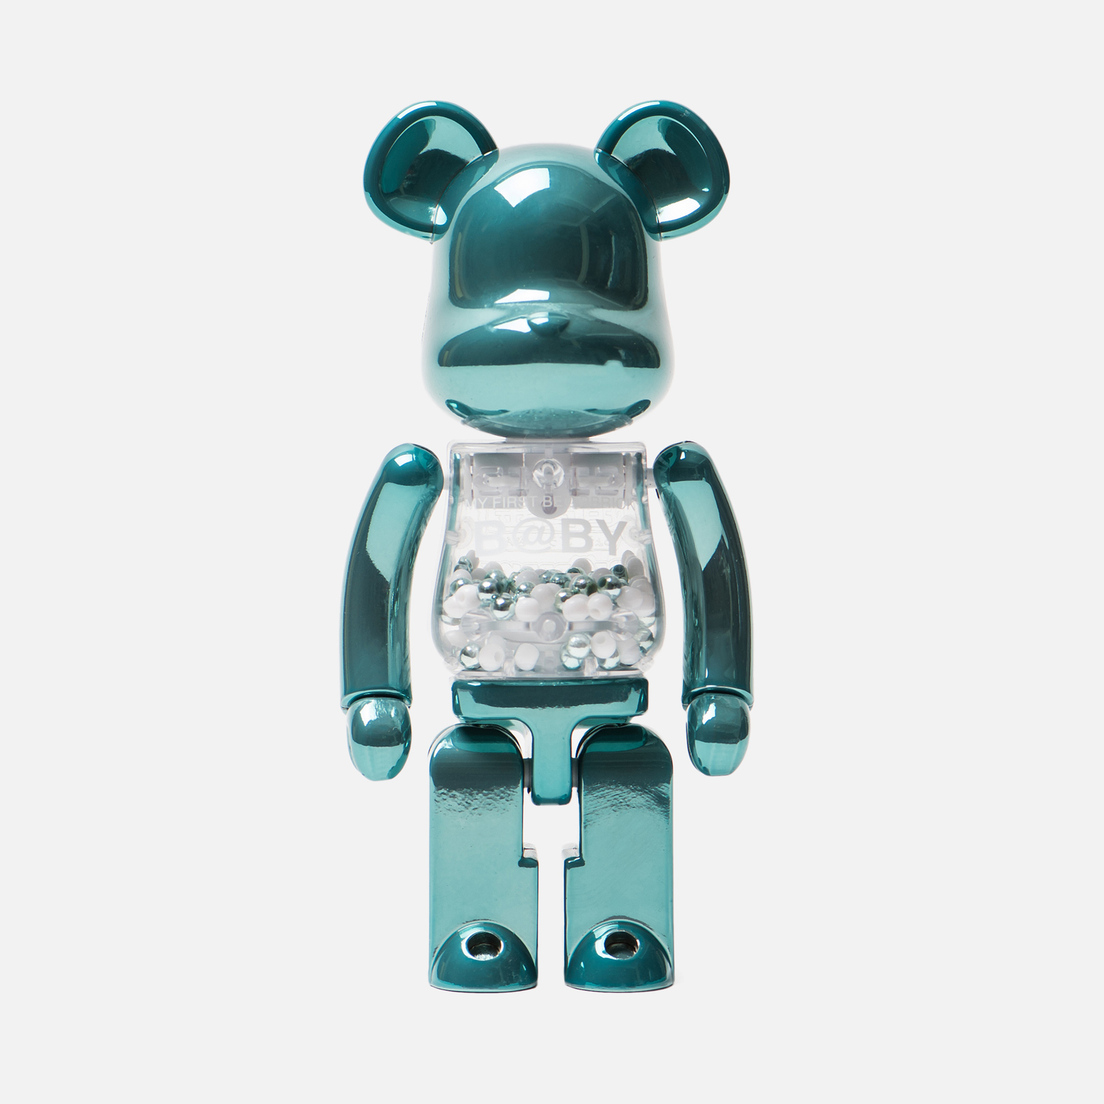 Medicom Toy Игрушка Chogokin My First B@by Turquoise 200%